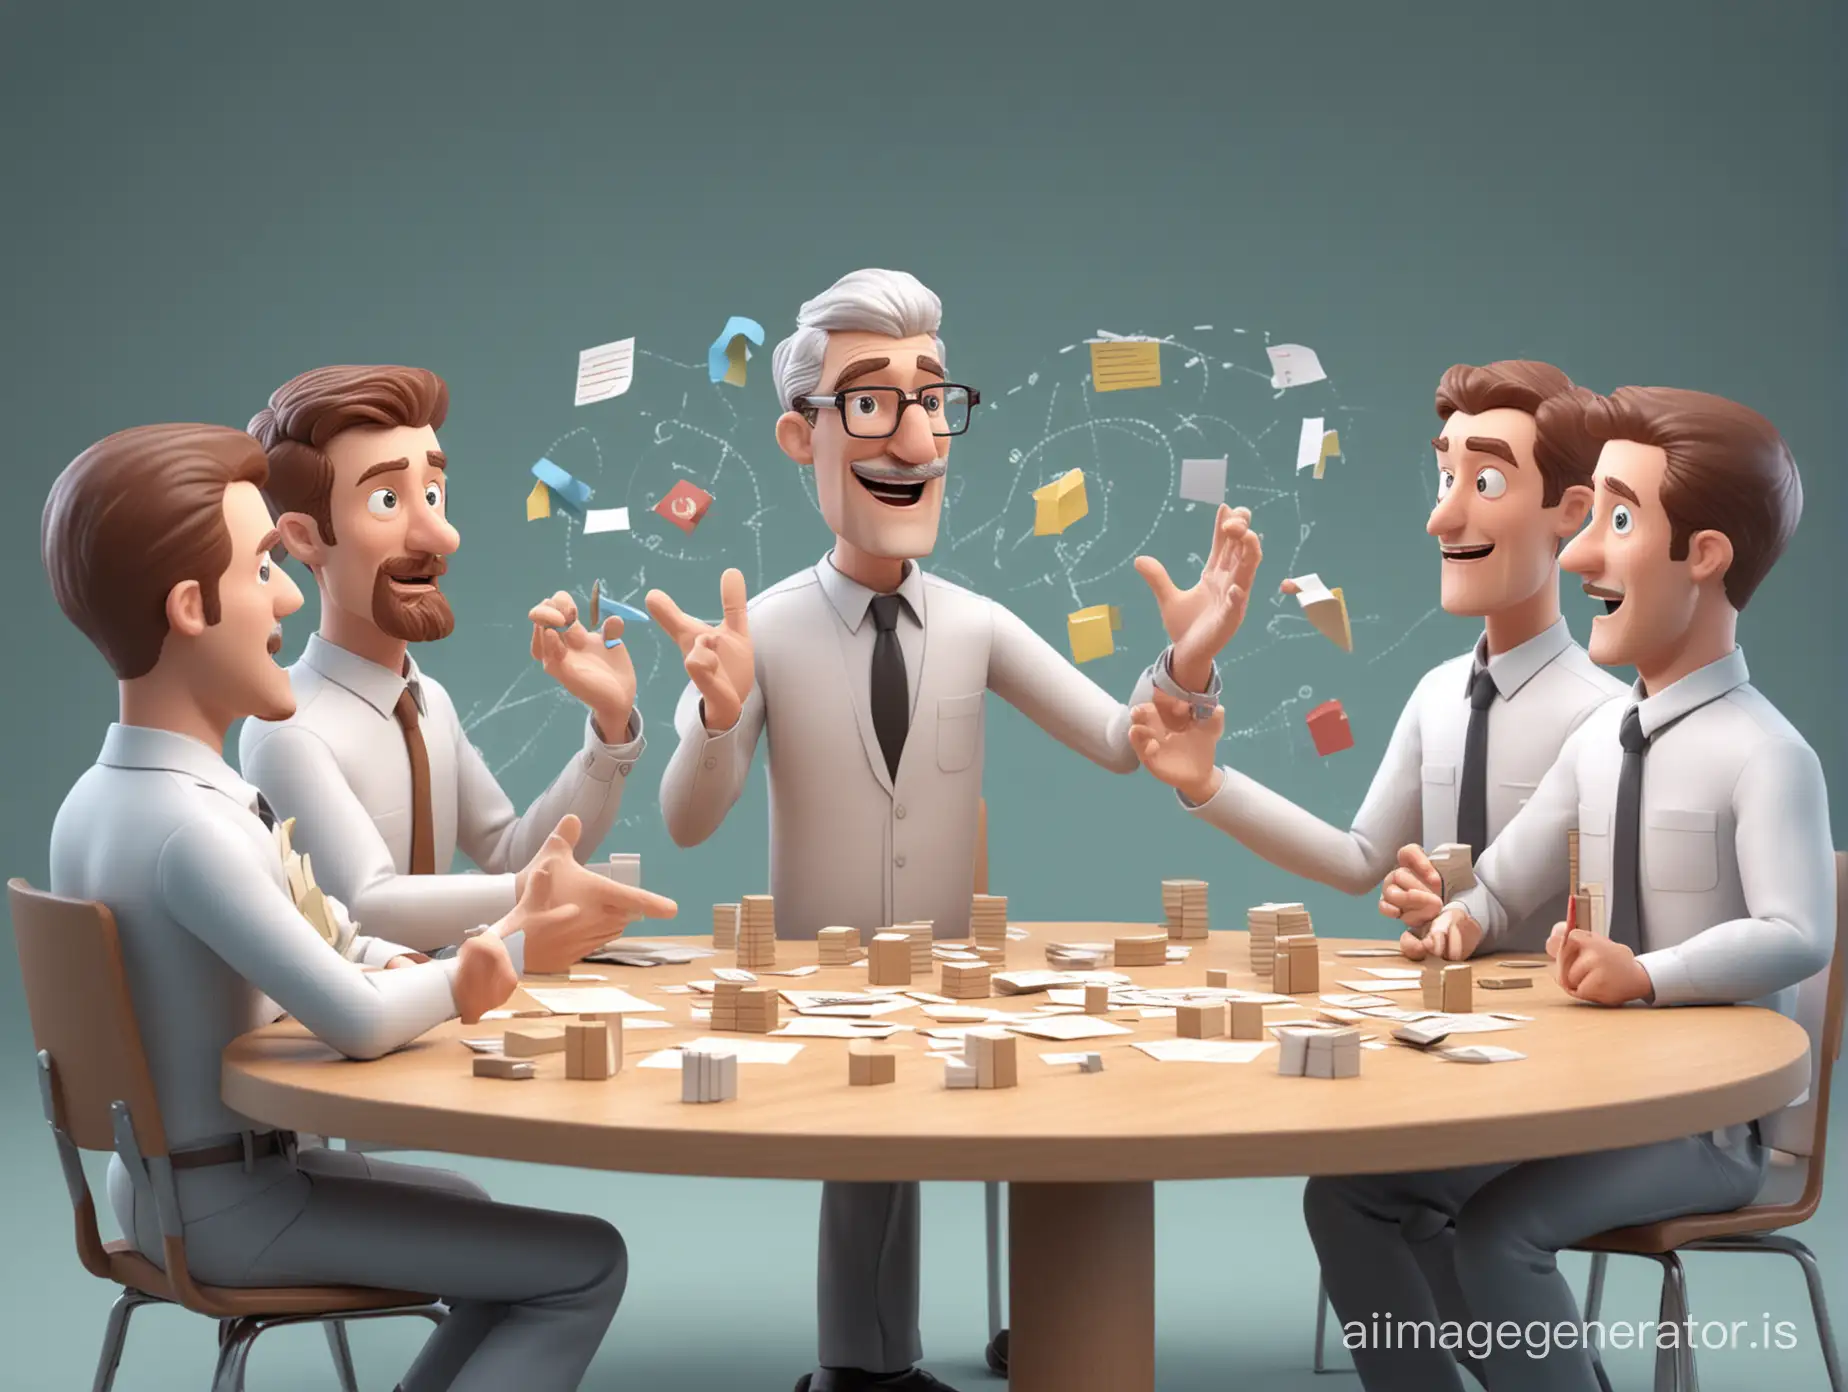 3D illustration of a man explaining quality management principles to his colleagues